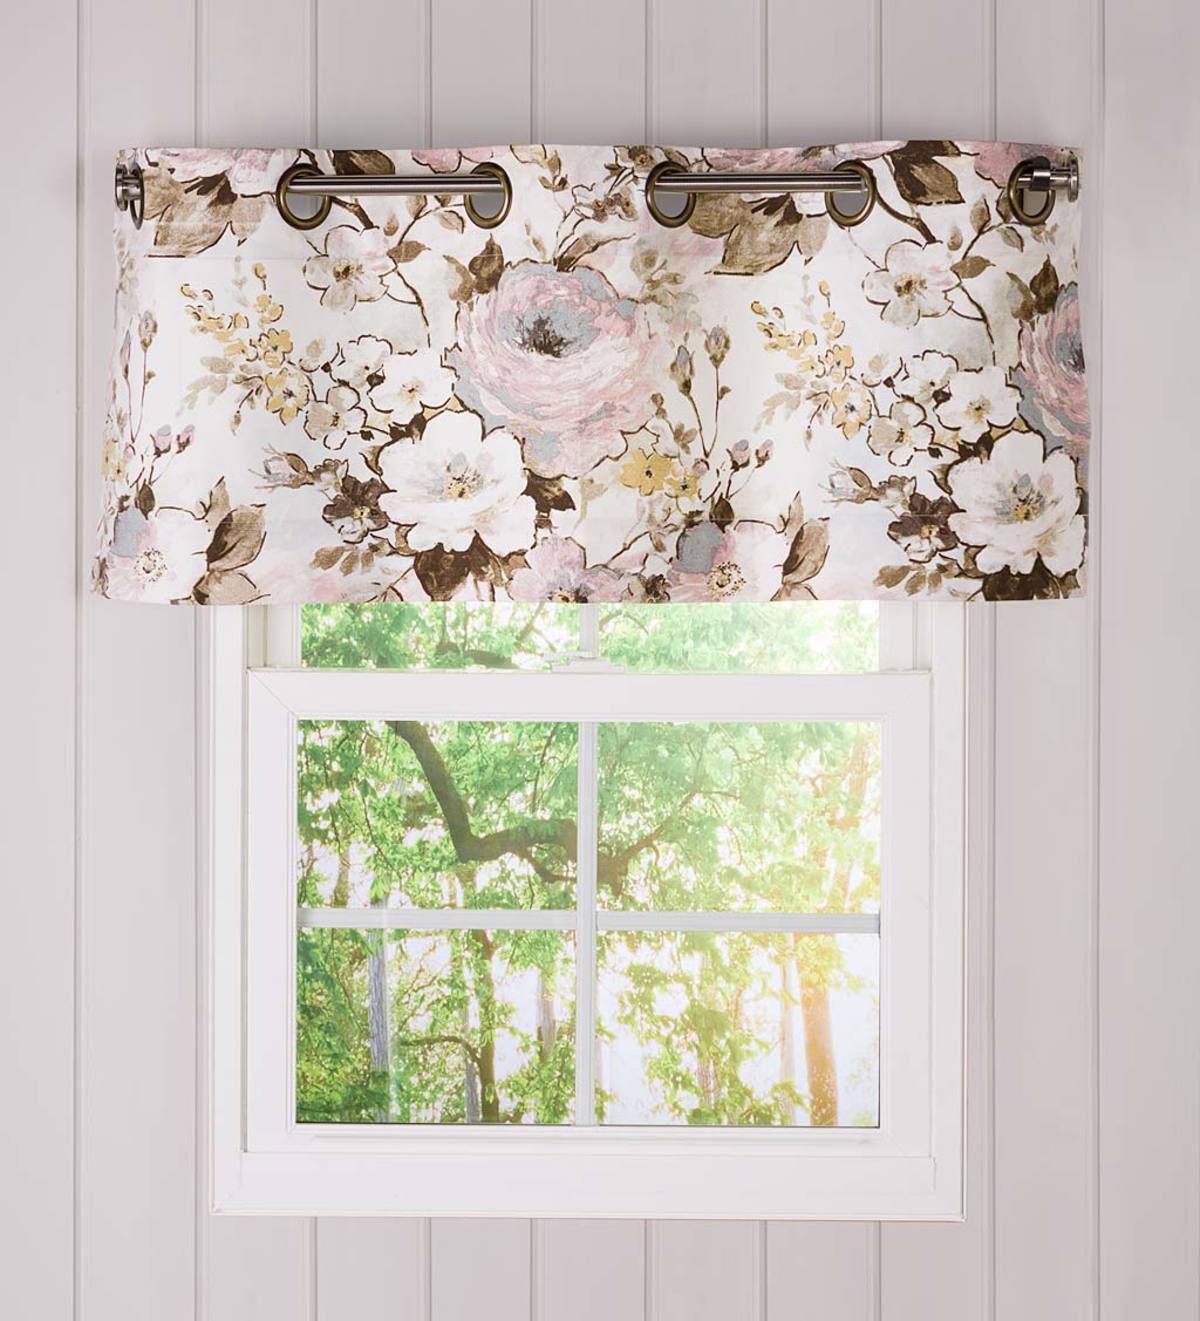 Thermalogic Insulated Bella Donna Floral Grommet-Top Valance, 40"W x 15"L